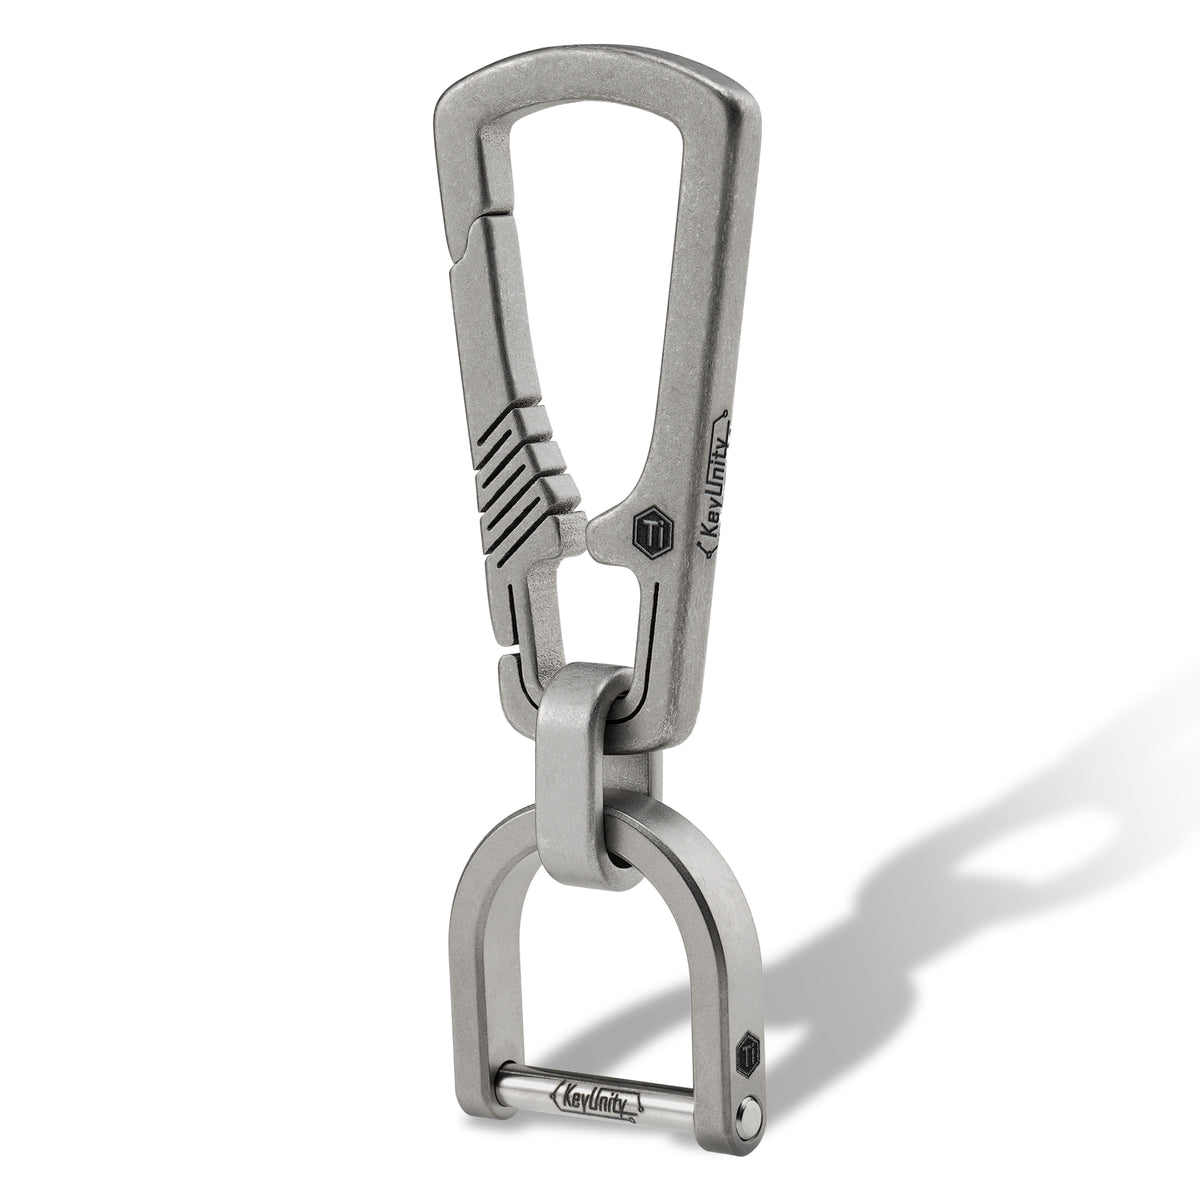 This titanium carabiner clip for your keys and EDC will last